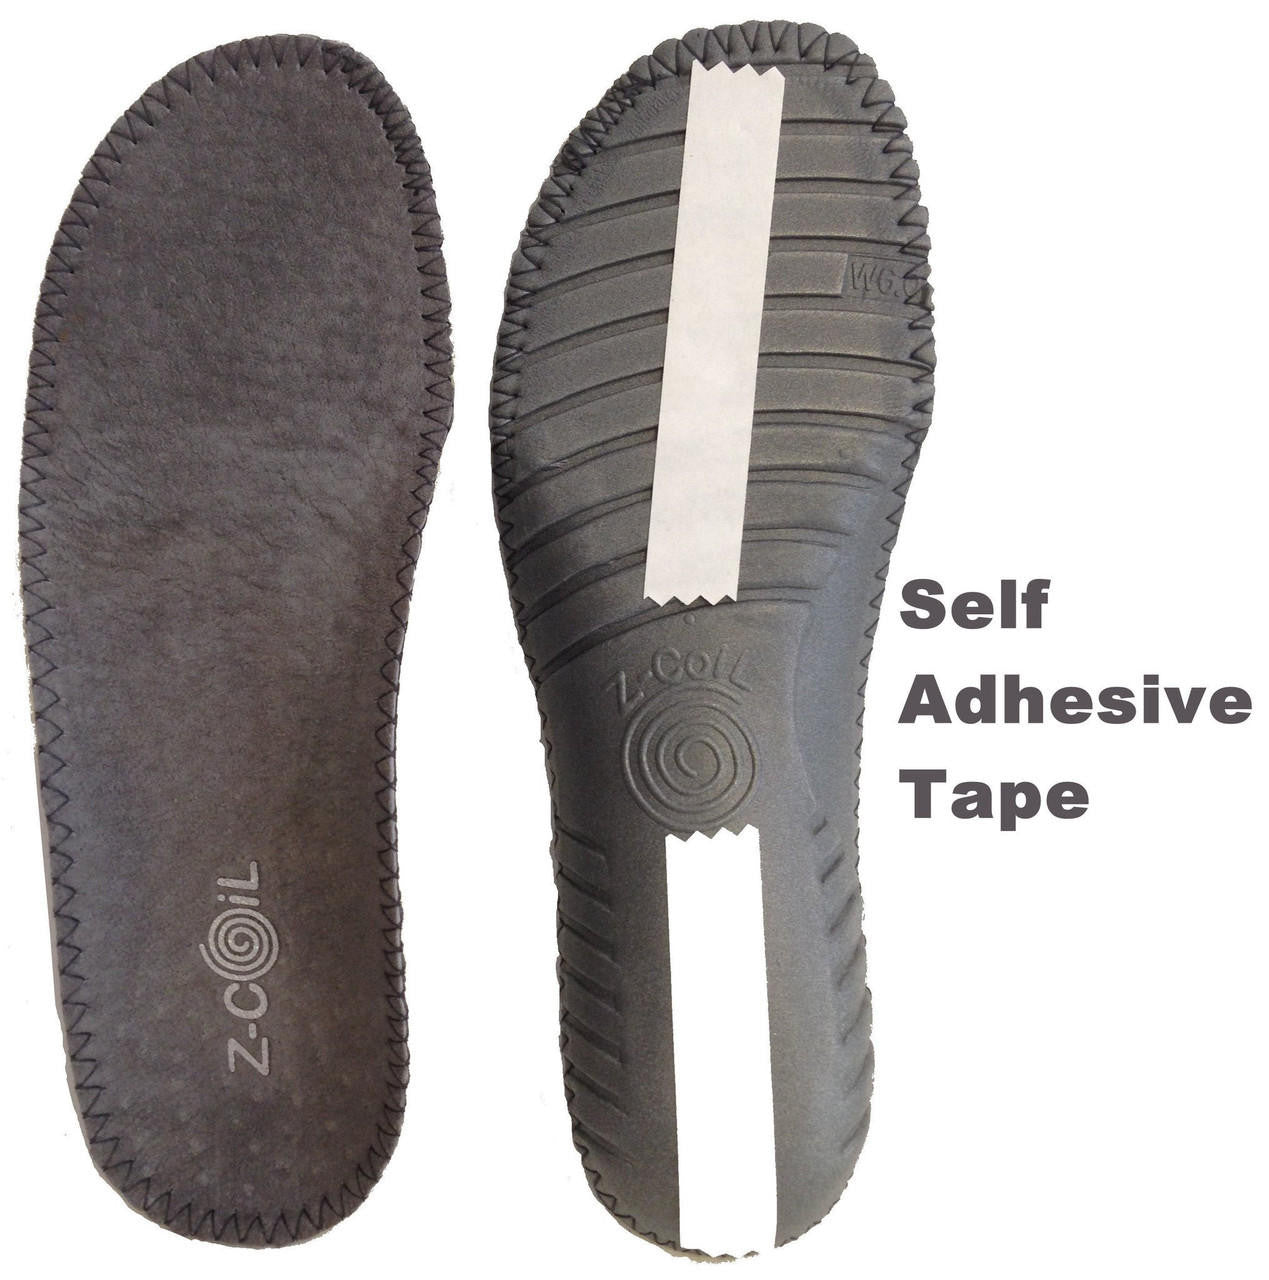 Z-CoiL Pain Relief Footwear: Improve your stride and posture with Z-CoiL |  Milled